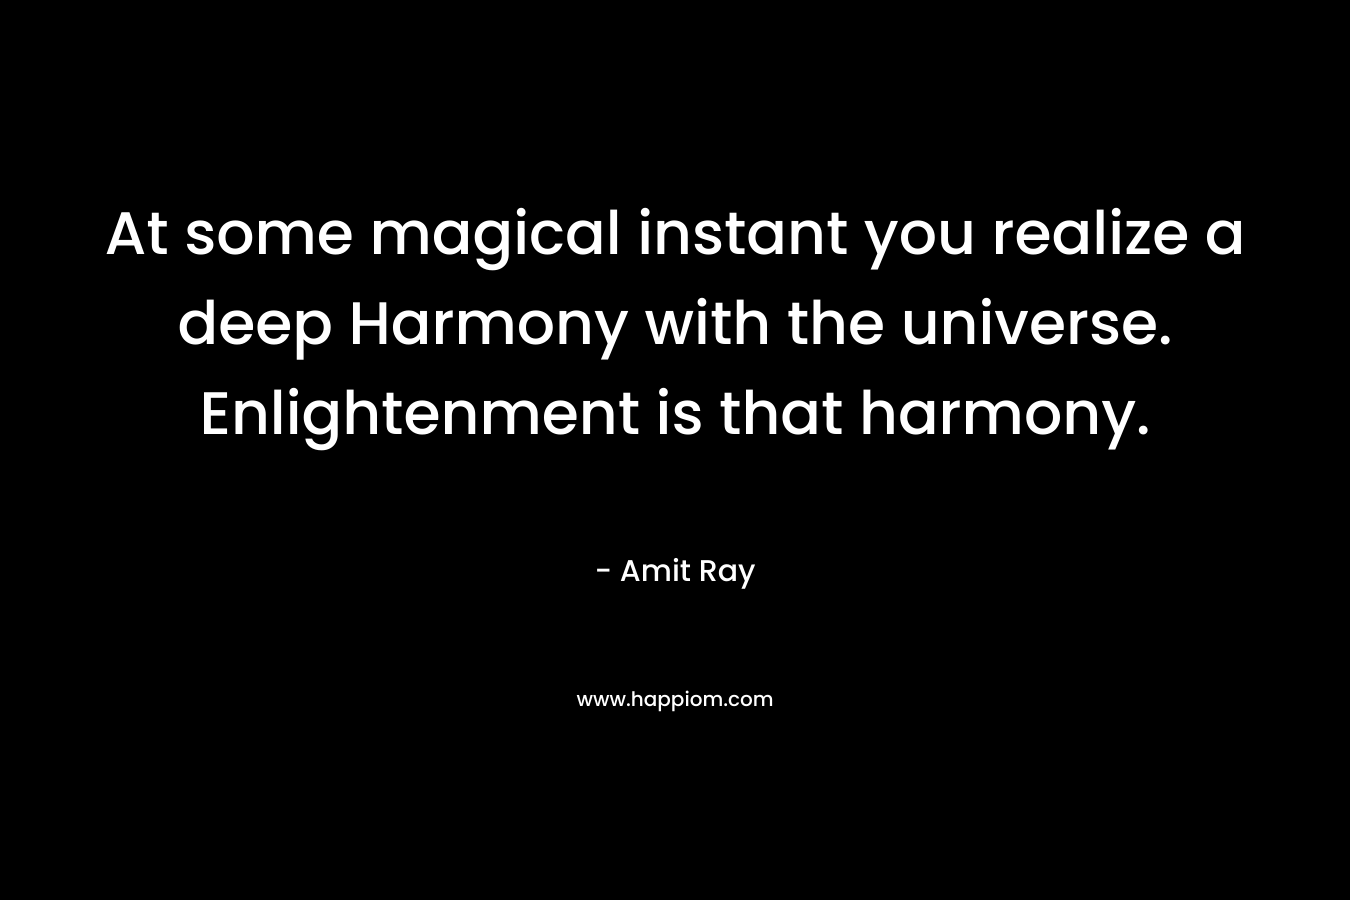 At some magical instant you realize a deep Harmony with the universe. Enlightenment is that harmony. – Amit Ray